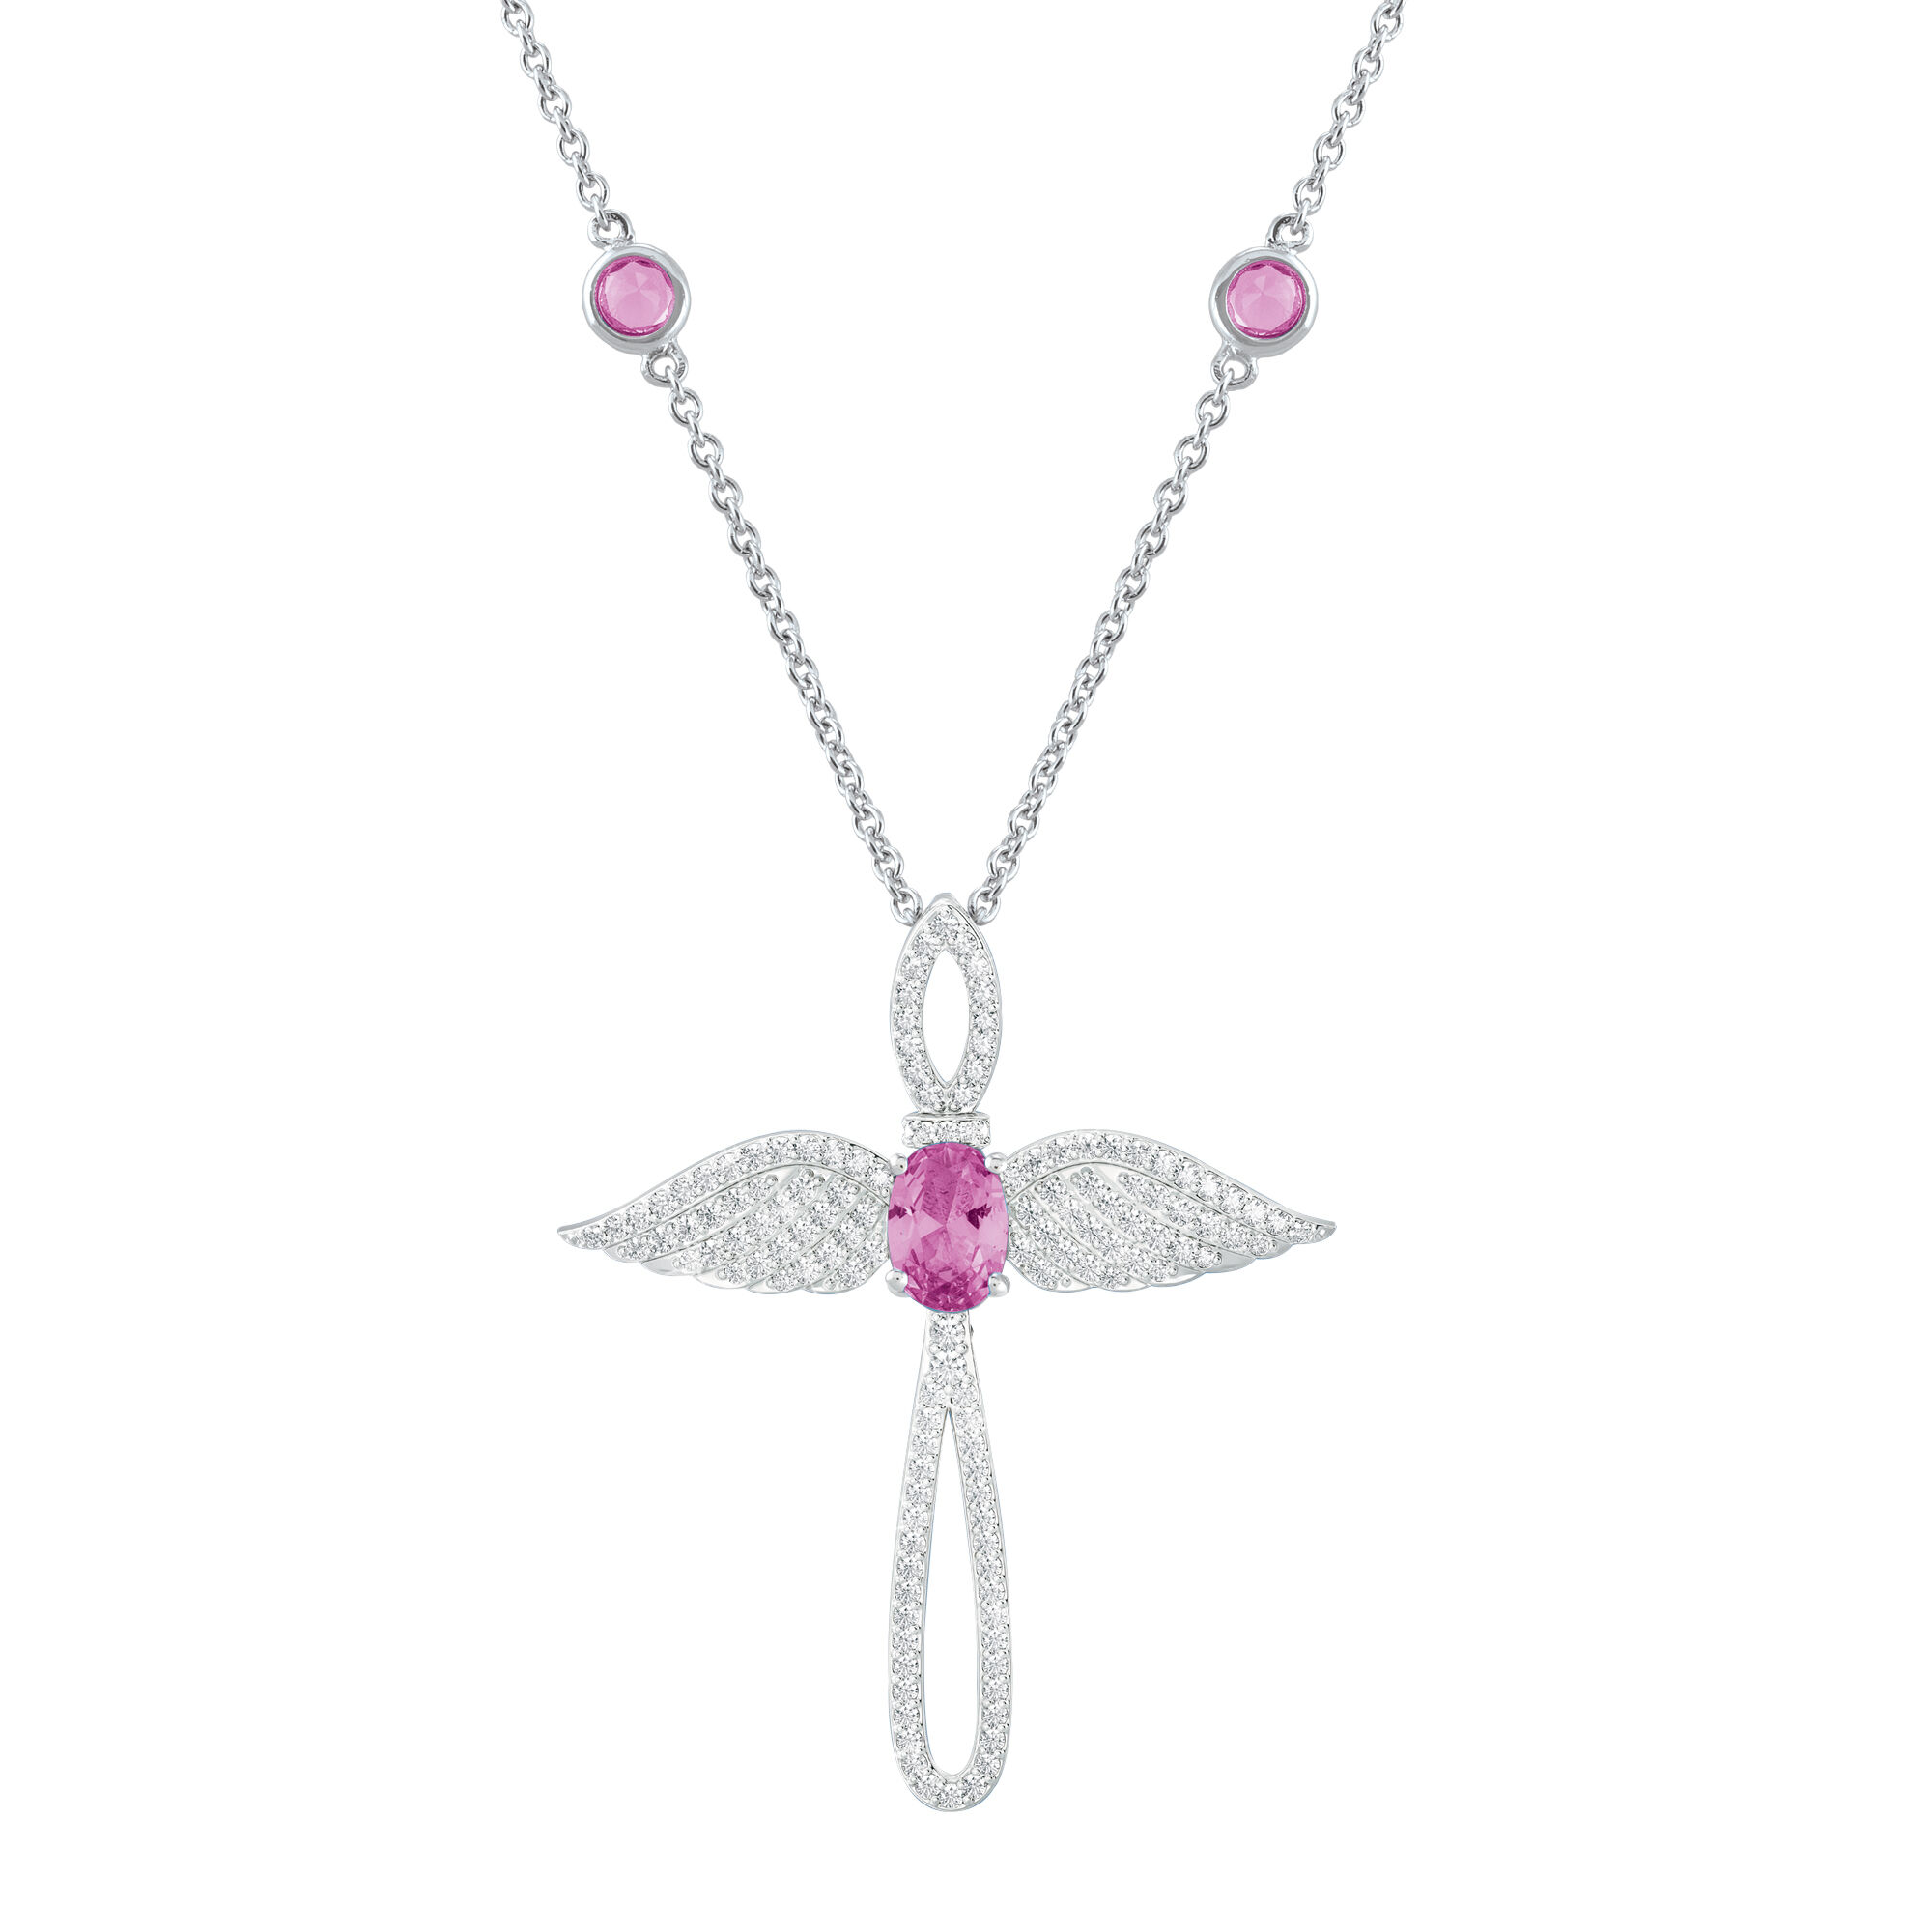 Touched by an Angel Birthstone Necklace 6842 0017 j october